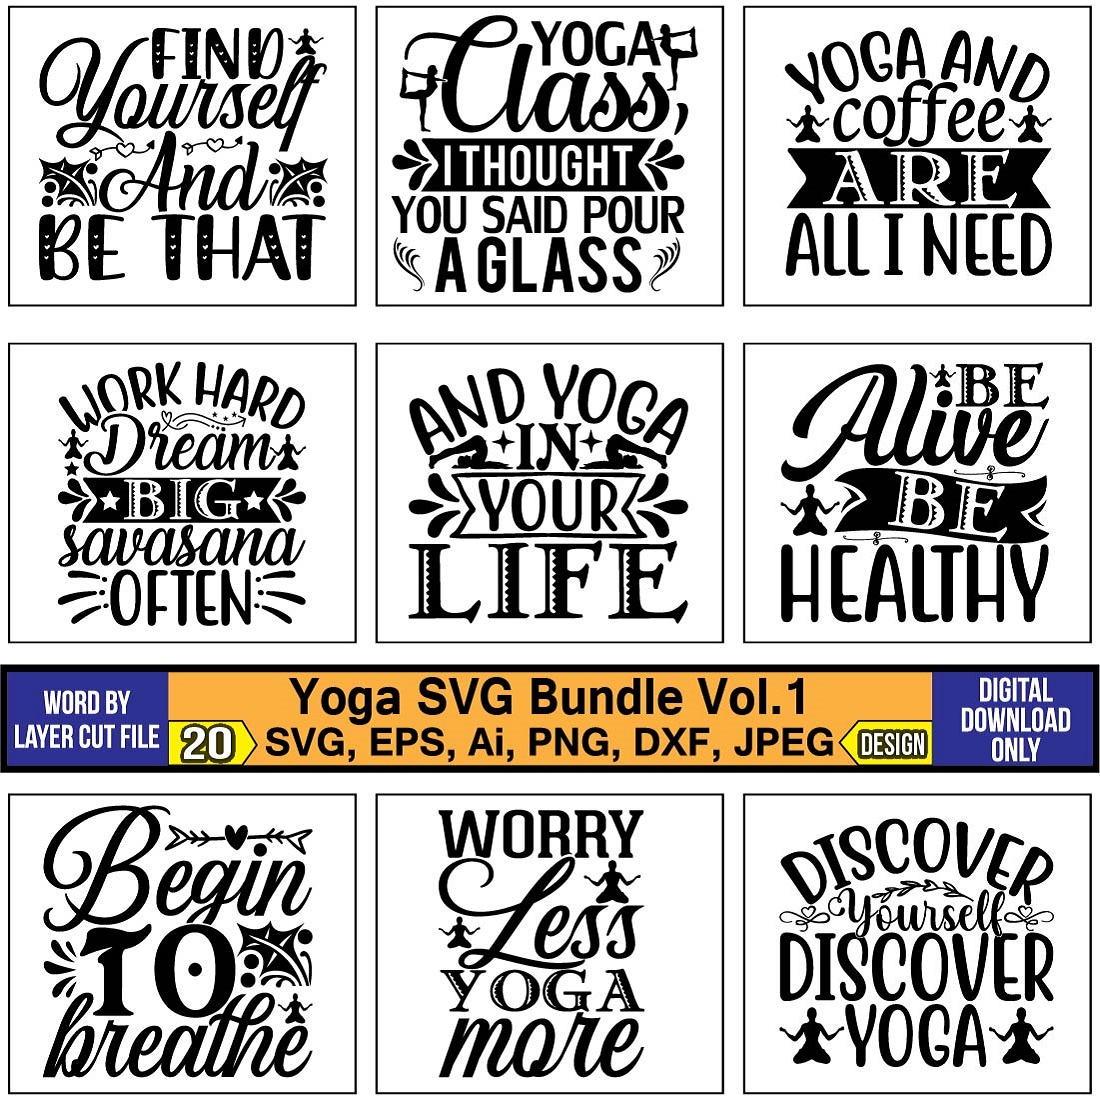 A collection of unique images for prints on the theme of yoga.